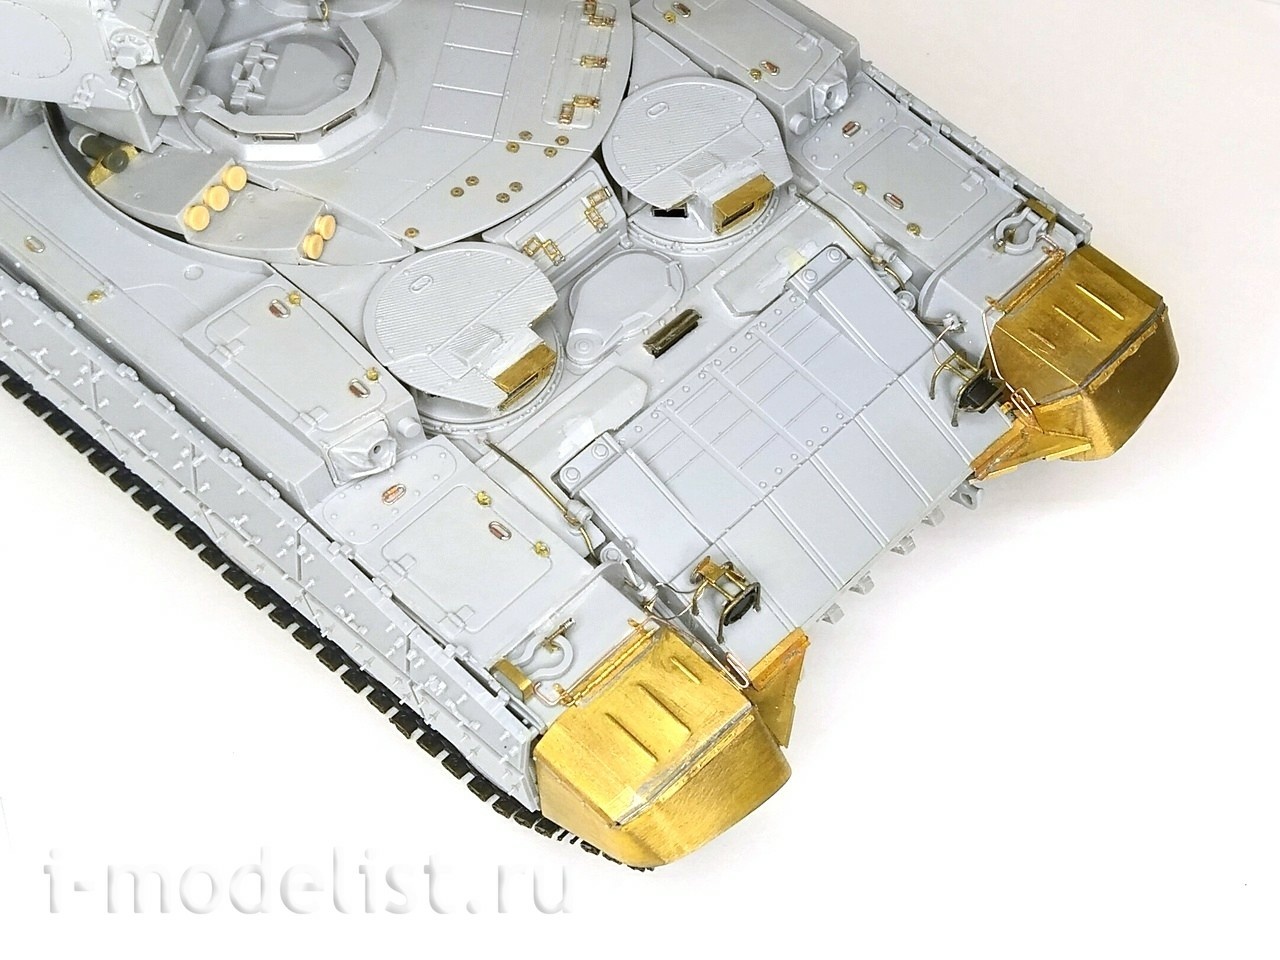 035330 Microdesign 1/35 Front mud flaps BMPT/MSTA